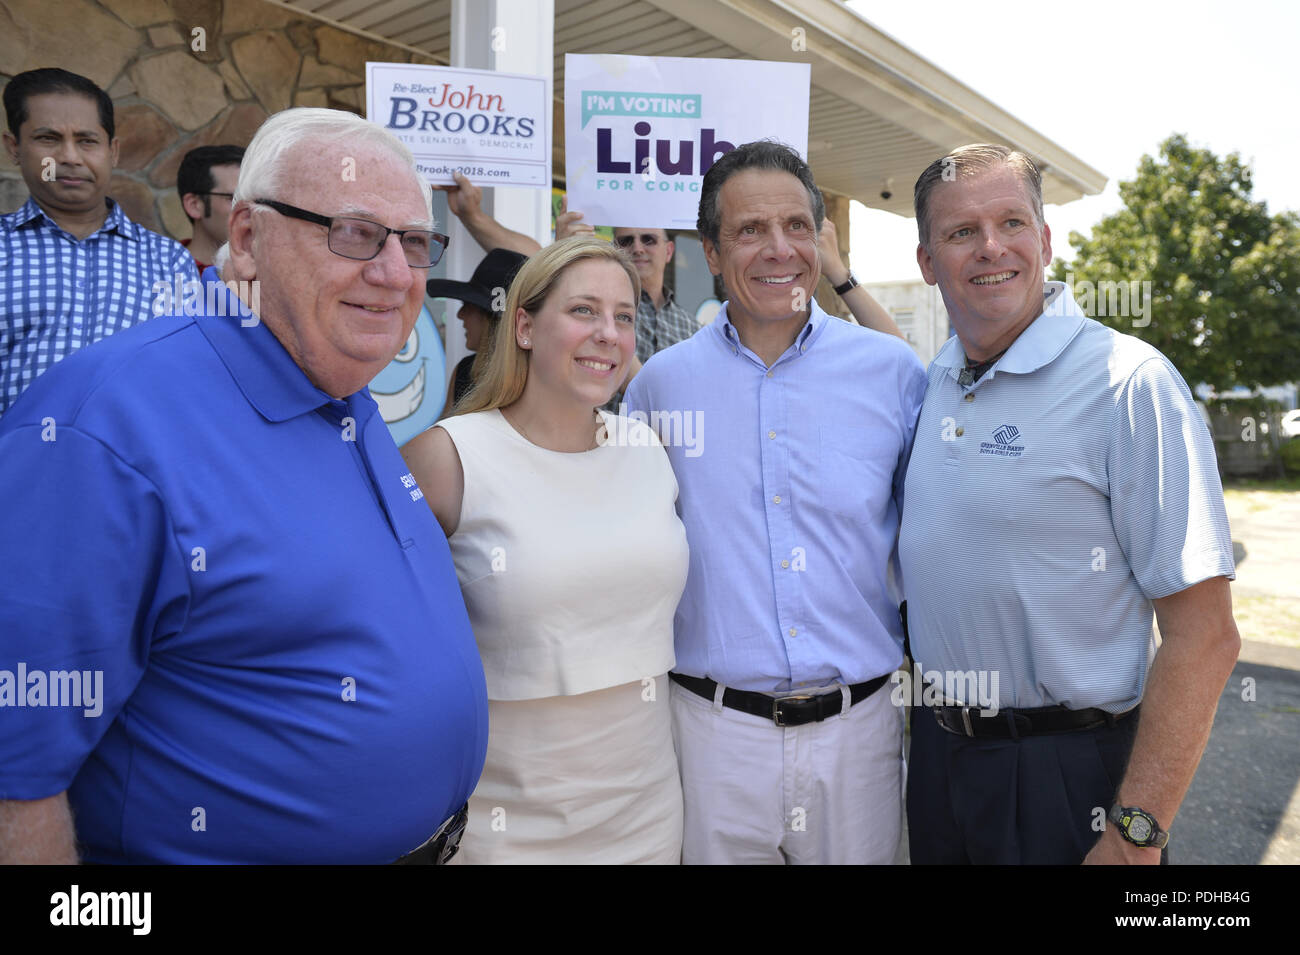 Massapequa, New York, USA. 5th Aug, 2018. L-R, NY Senator JOHN BROOKS; LIUBA GRECHEN SHIRLEY, Congressional candidate for NY 2nd District; Governor ANDREW CUOMO; and DAVID GUGERY, the Democratic Commissioner of Nassau County Board of Elections; pose during opening of joint campaign office for the 2 Long Islander candidates, aiming for a Democratic Blue Wave in November midterm elections. Credit: Ann Parry/ZUMA Wire/Alamy Live News Stock Photo